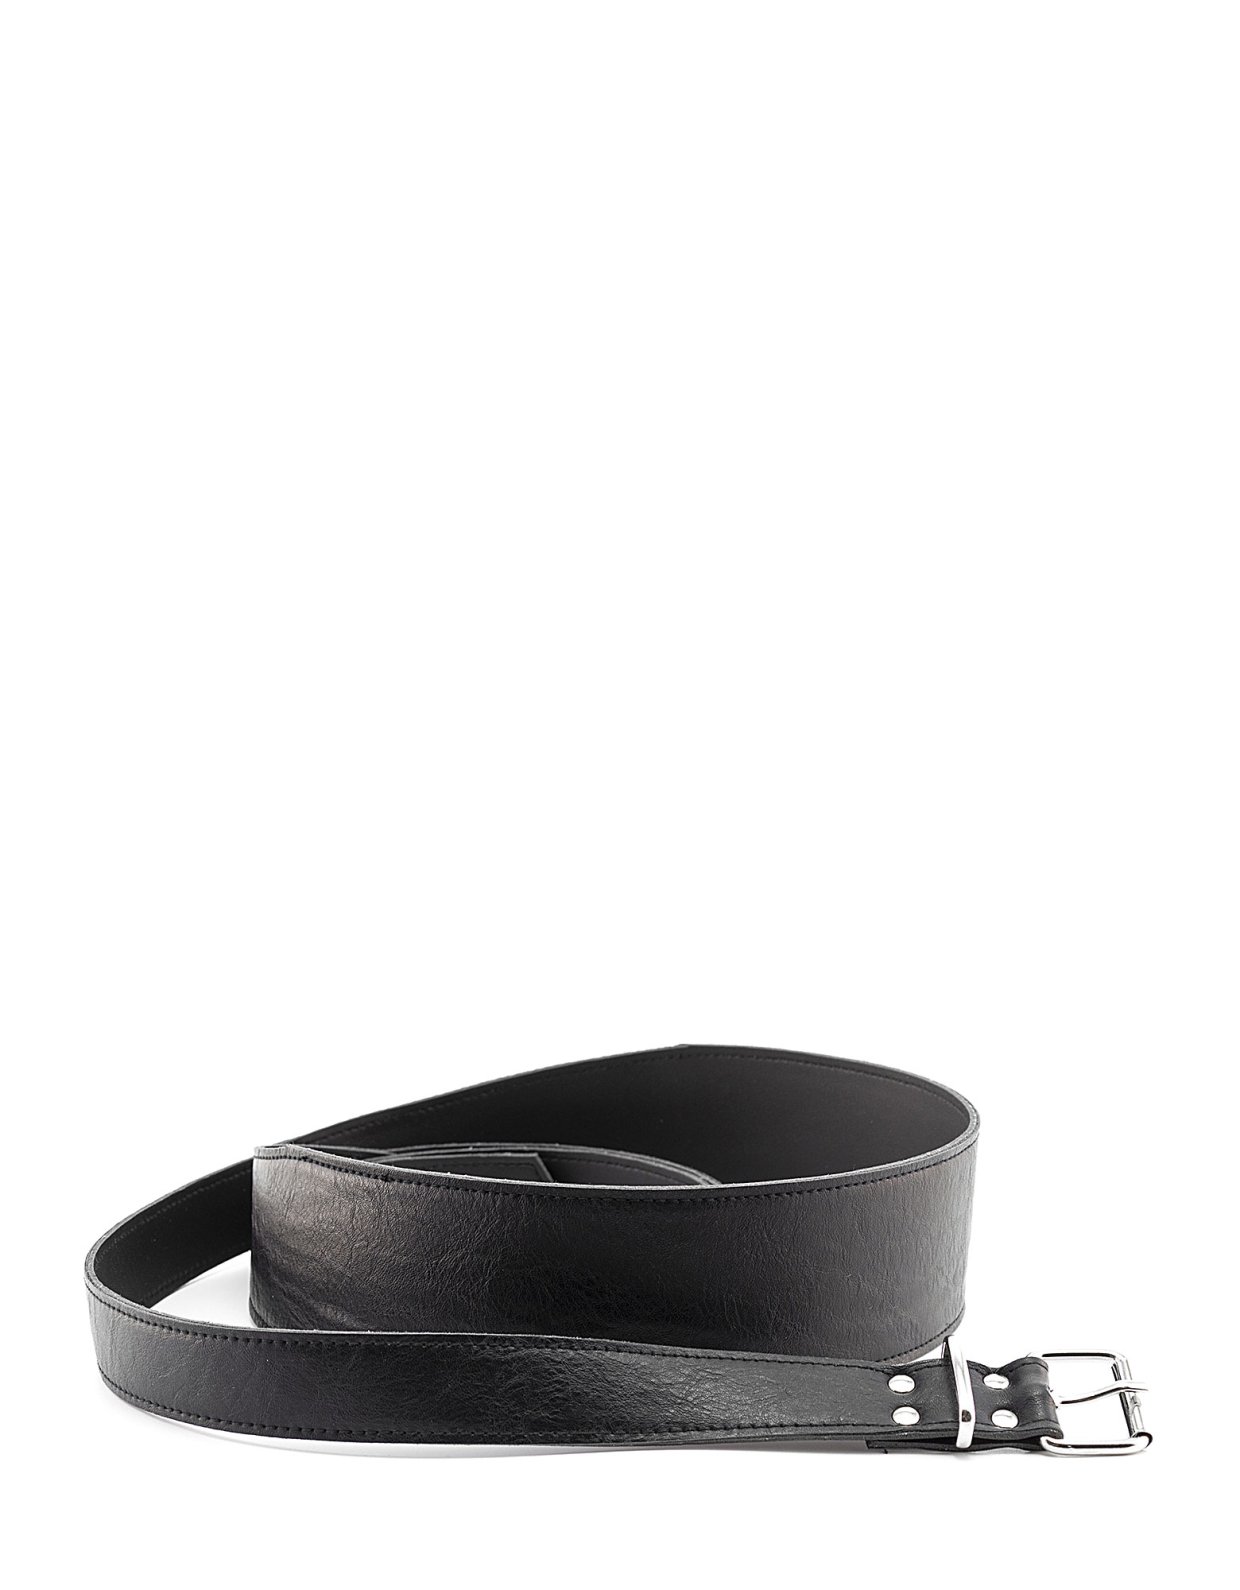 Peace & Chaos Rica eco leather belt black